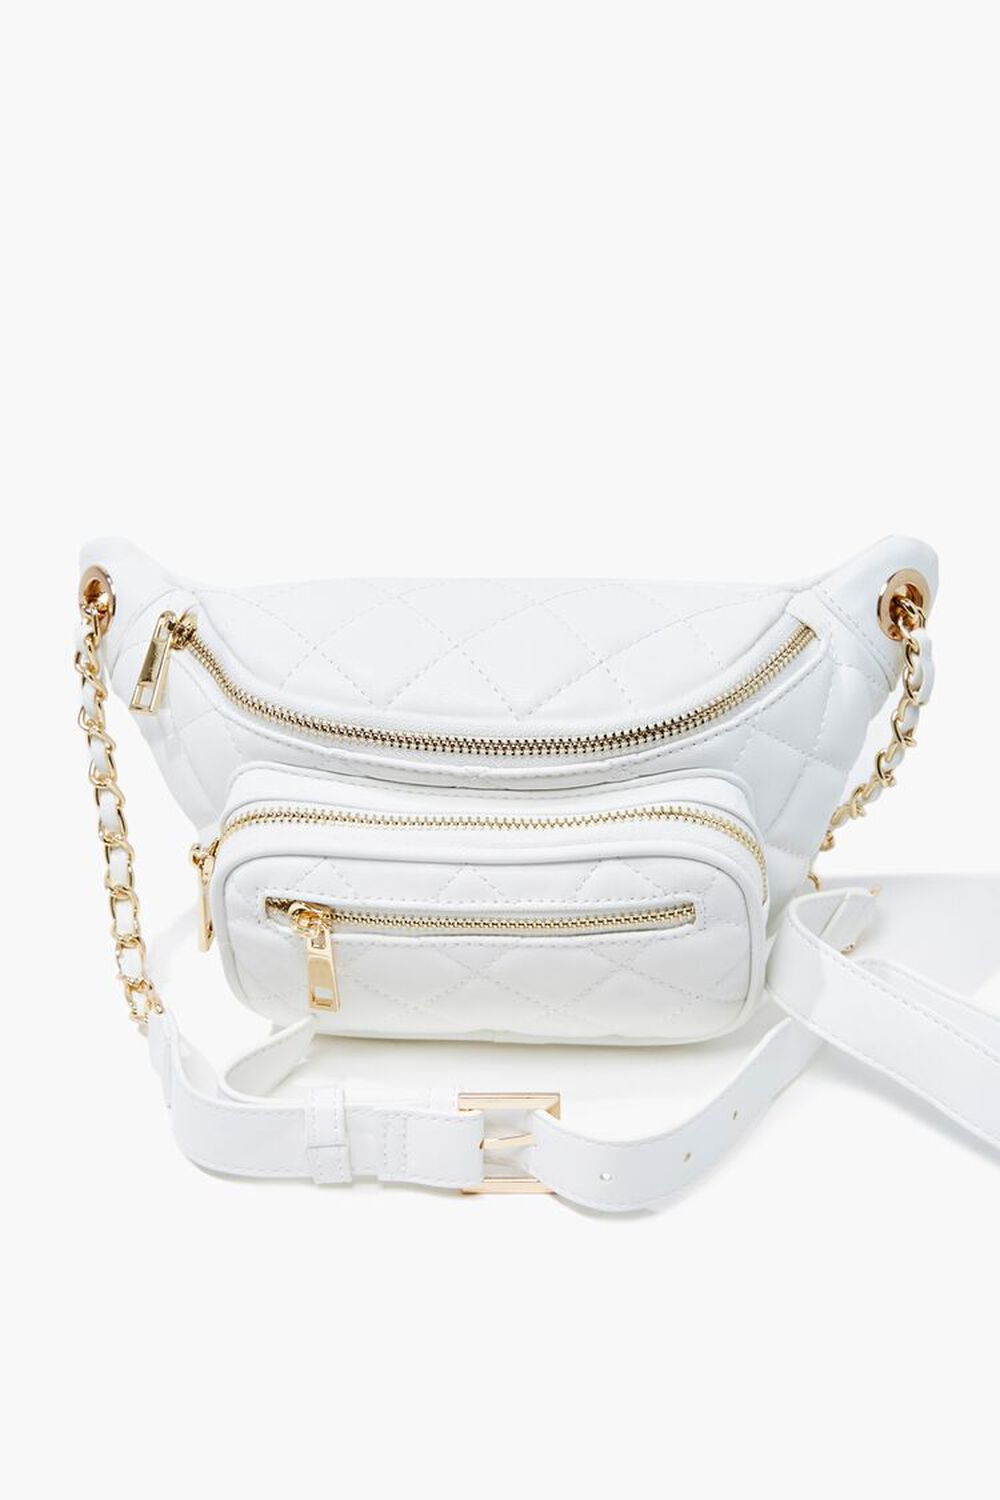 WHITE Faux Leather Quilted Fanny Pack, image 2